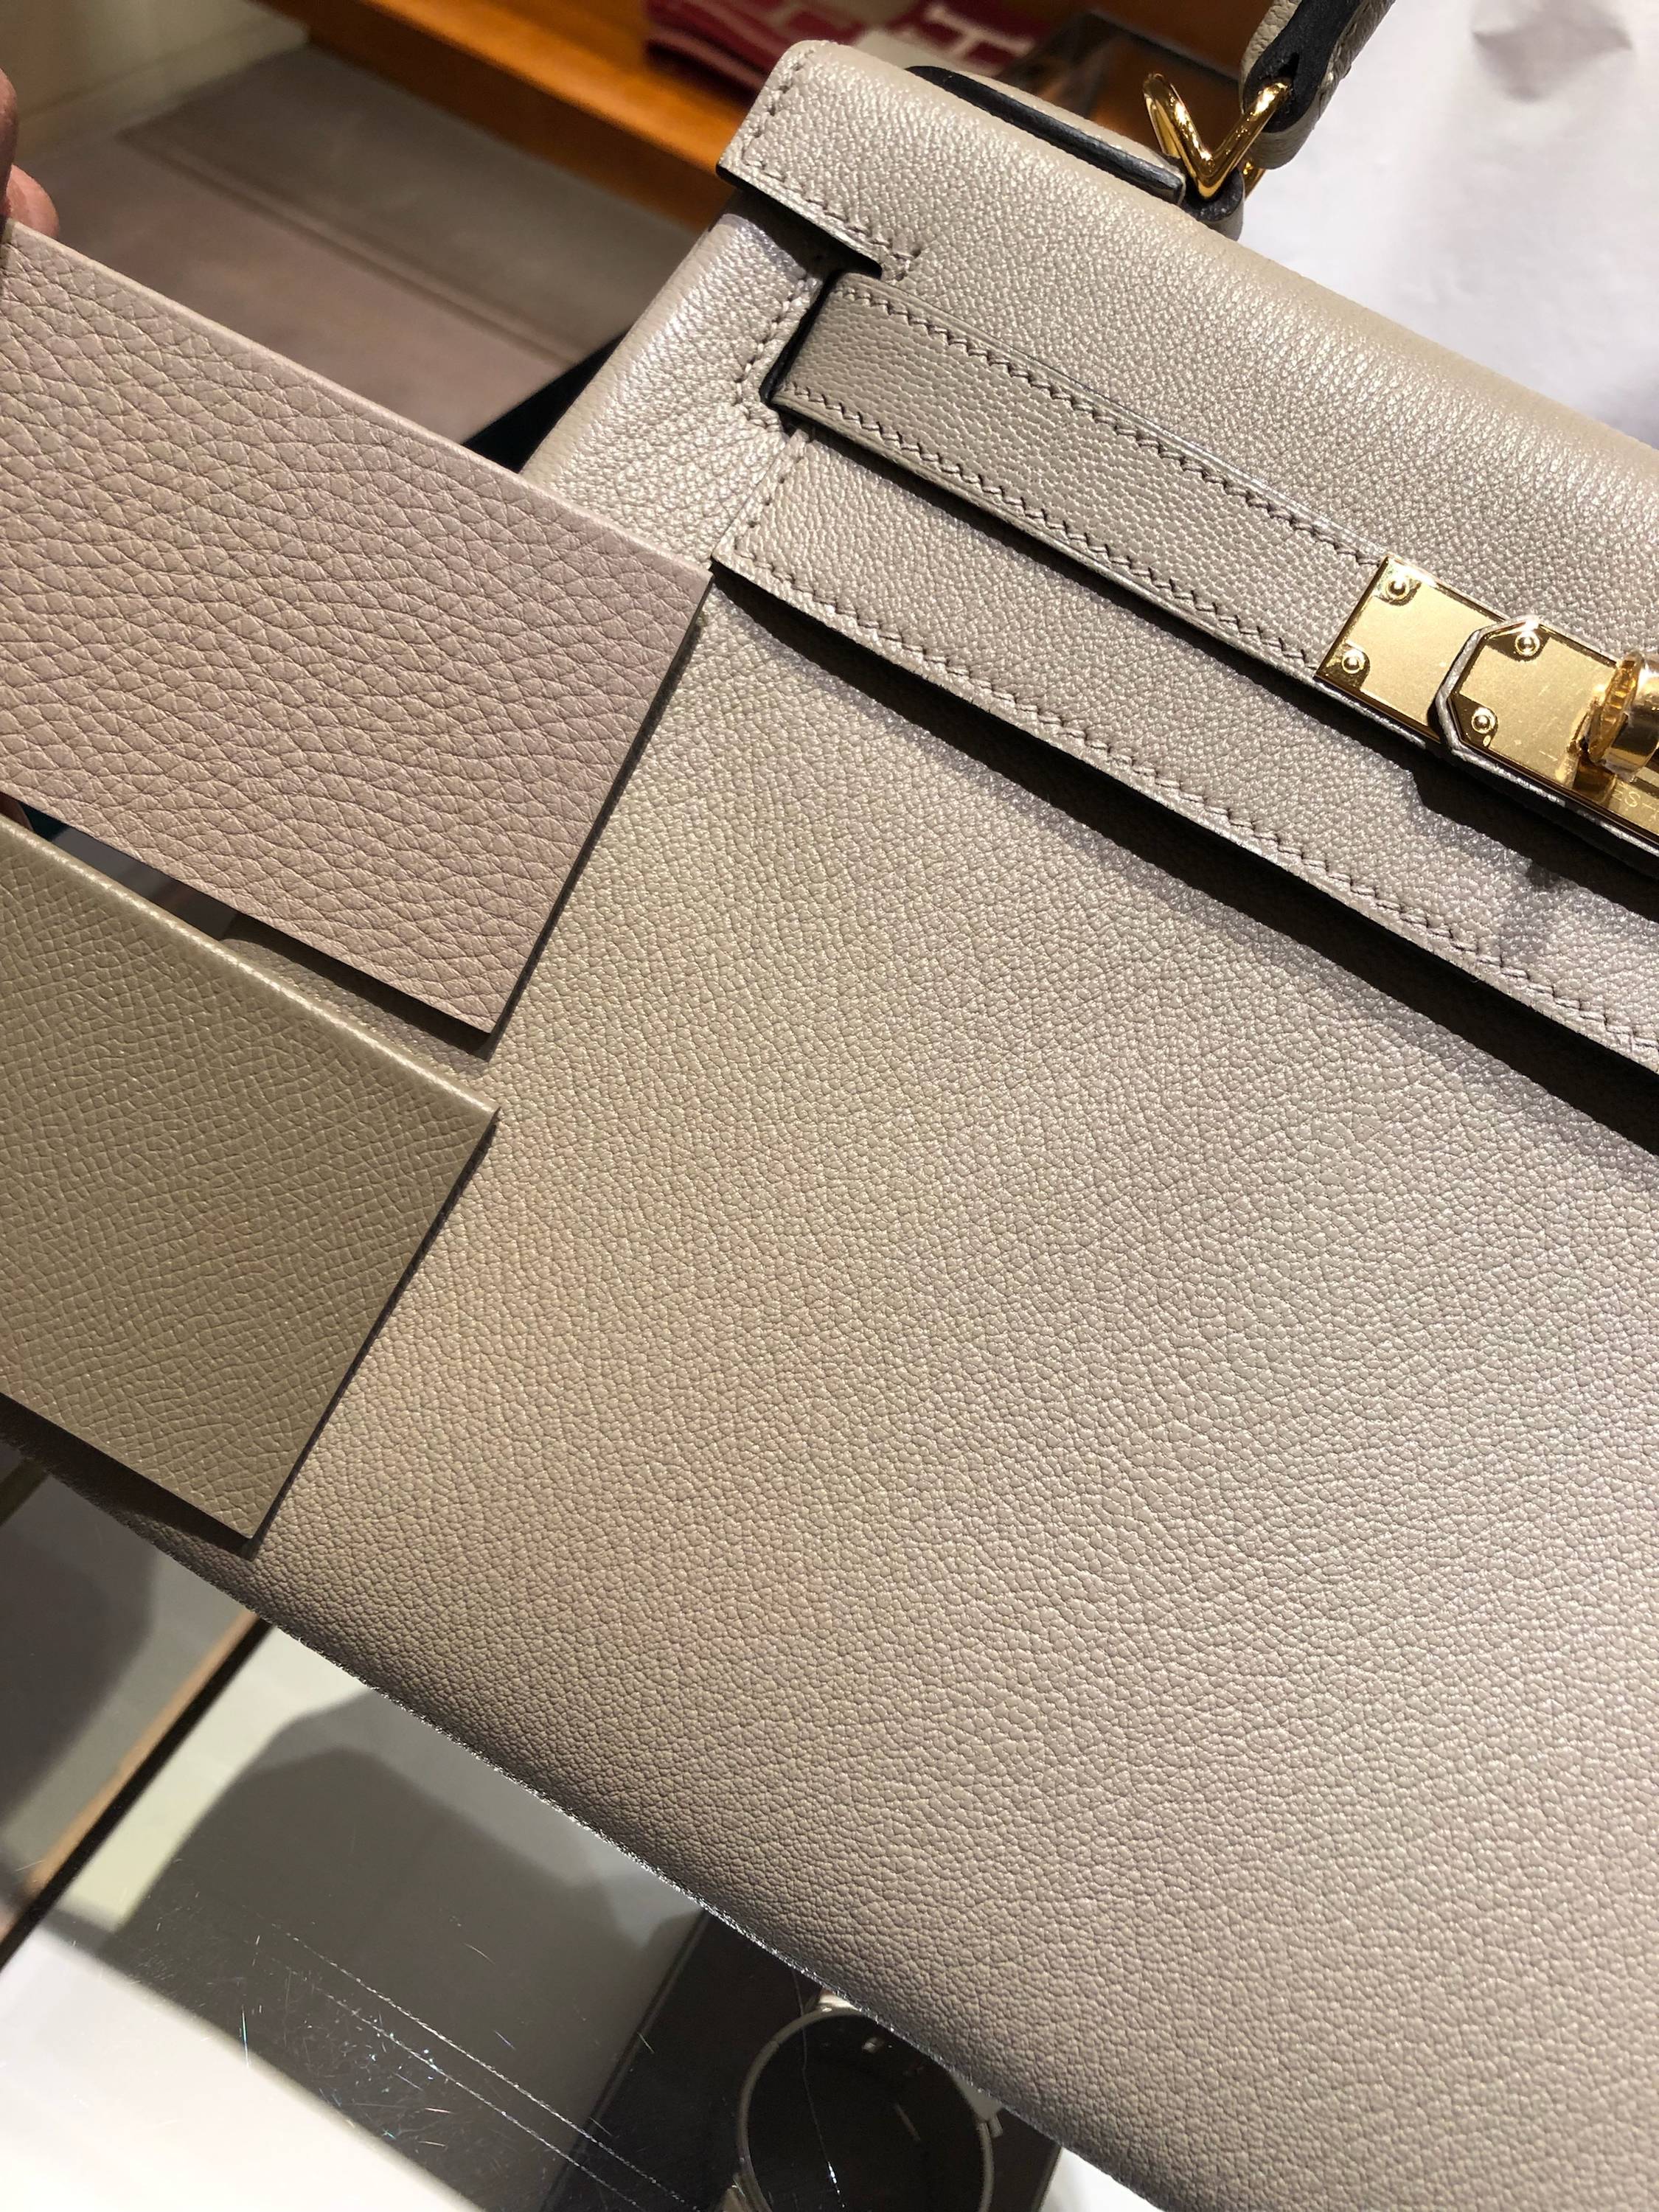 Hermes Kelly 32 Review – The Everlasting Style Icon - Unwrapped